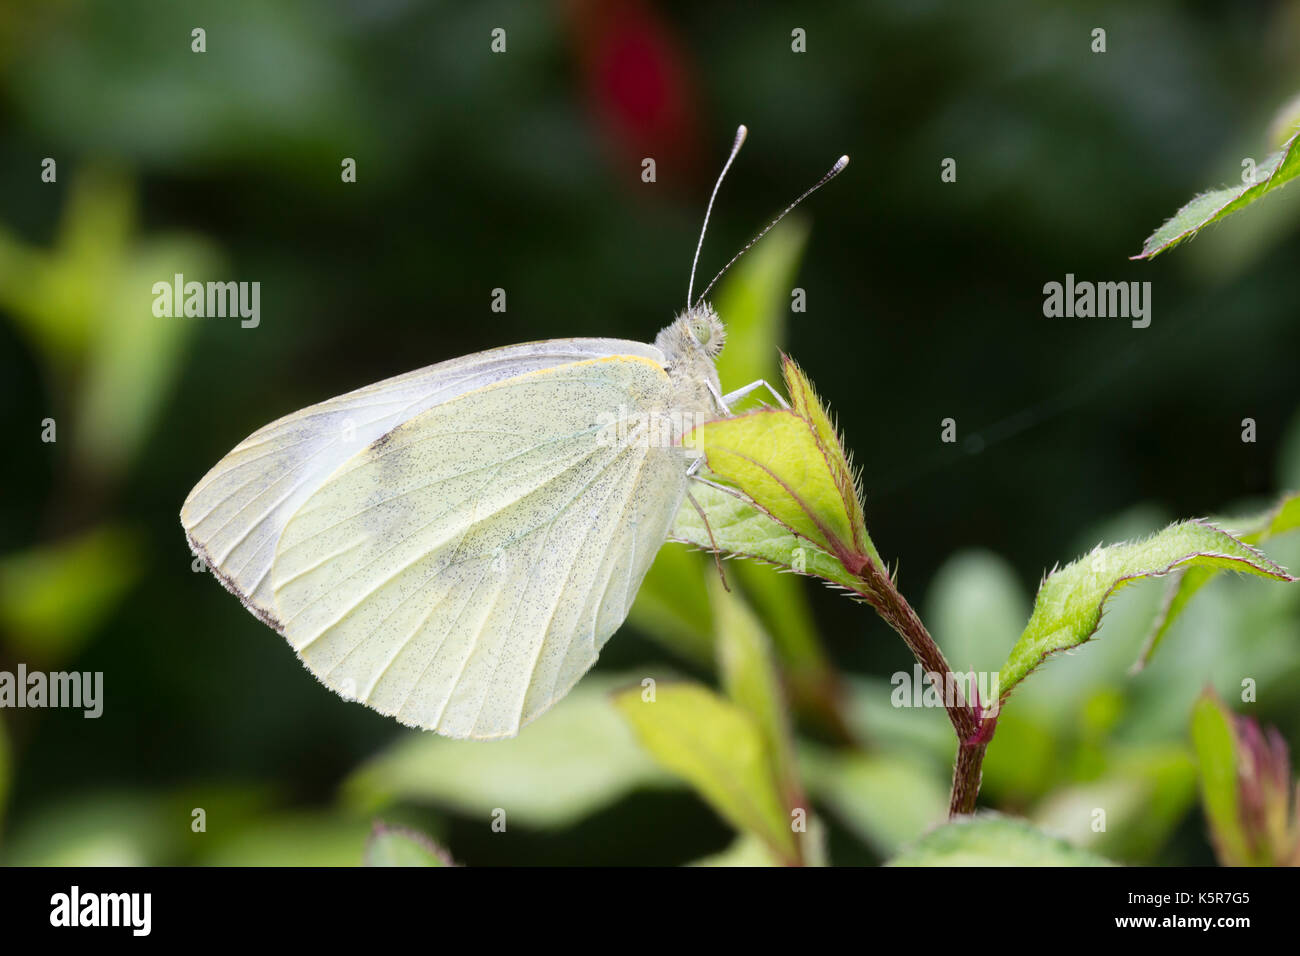 Male large white butterfly, Pieris brassicae, resting on foliage Stock Photo